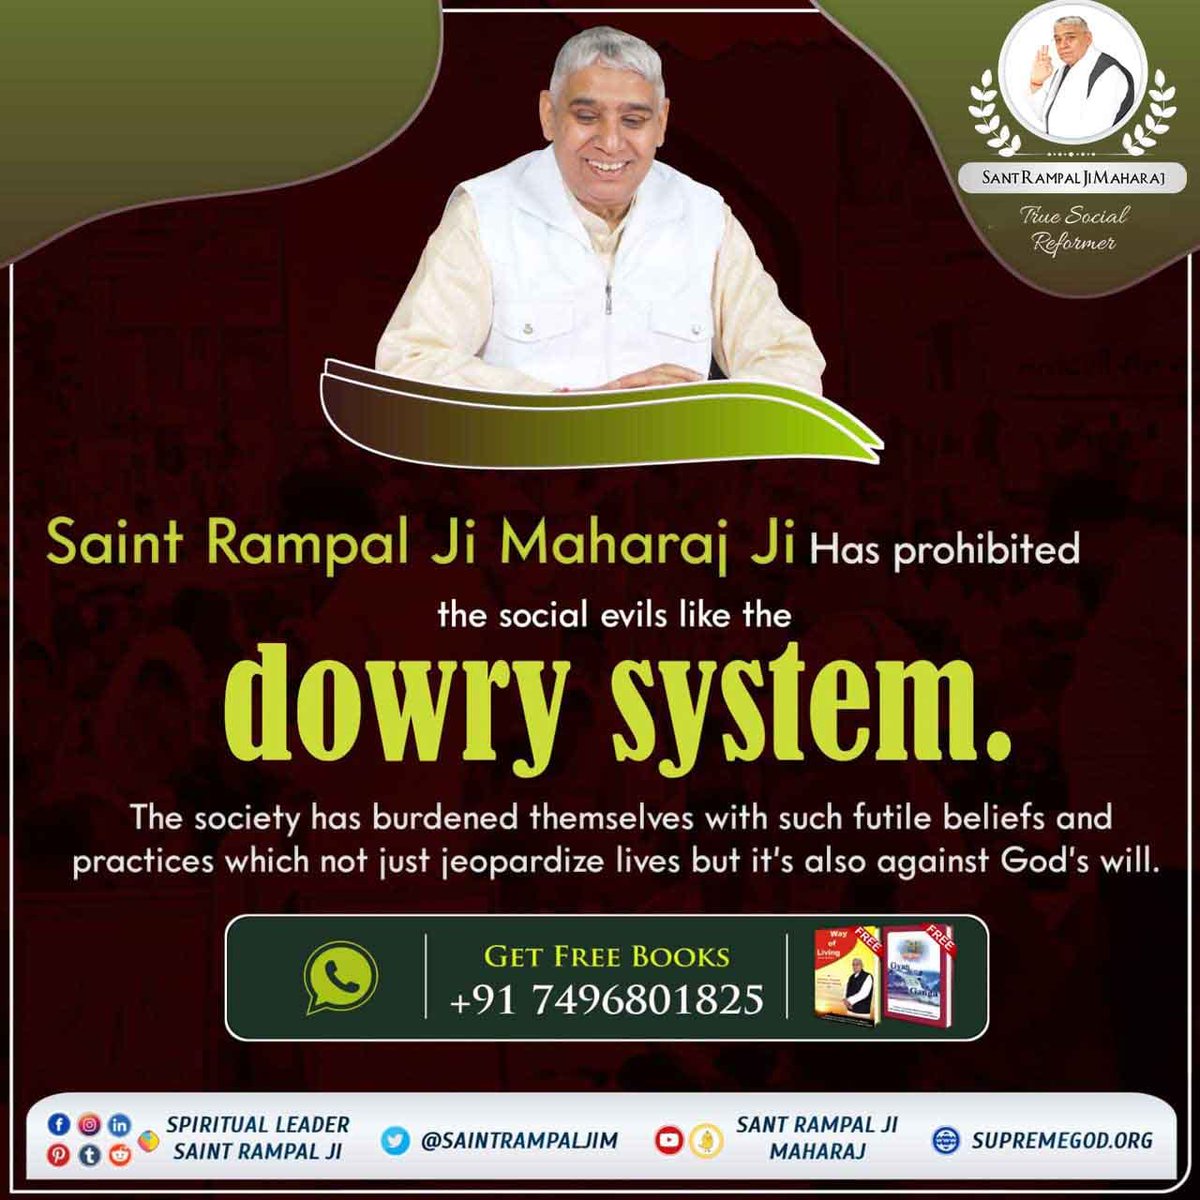 #अच्छे_हों_संस्कार_संसार_के बच्चों के

@SaintRampalJiM 
 
Has prohibited
the social evils like the dowry system.
The society has burdened themselves with such futile beliefs and practices which not just jeopardize lives but it's also against God's will

 #GodMorningFriday